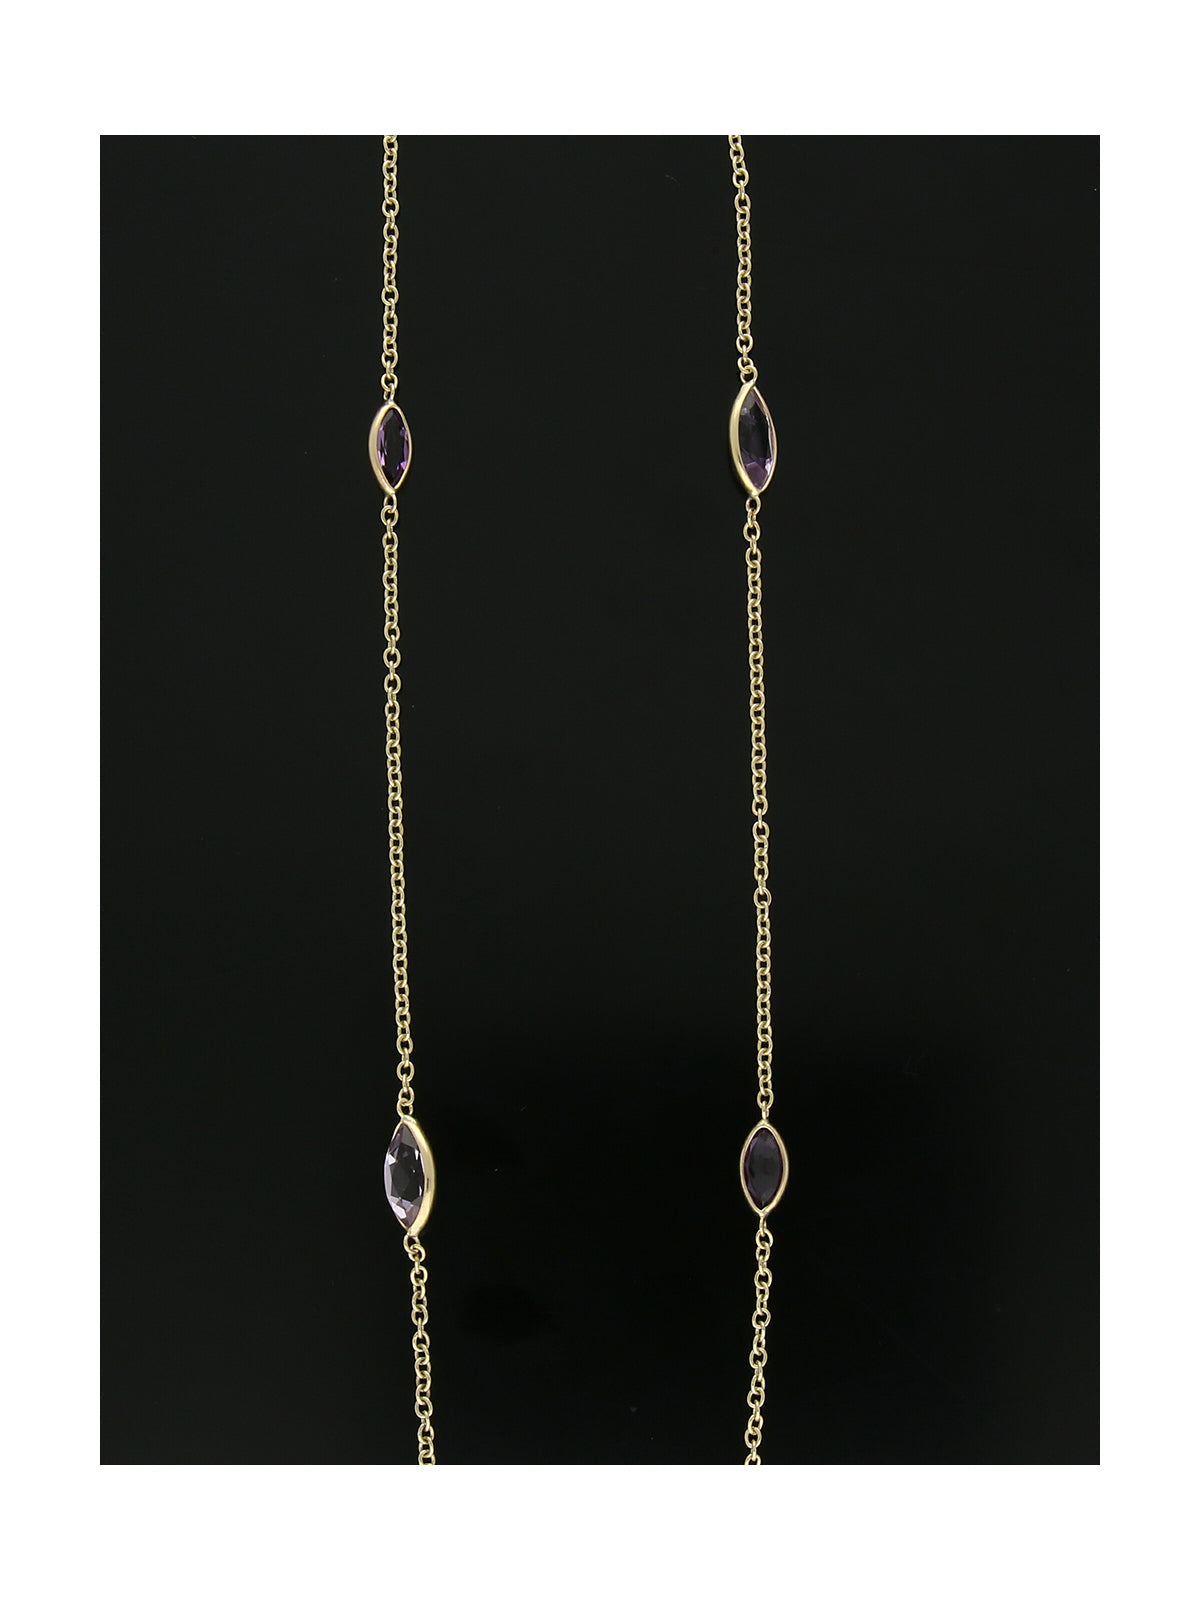 Amethyst Marquise Bead Necklace in 9ct Yellow Gold